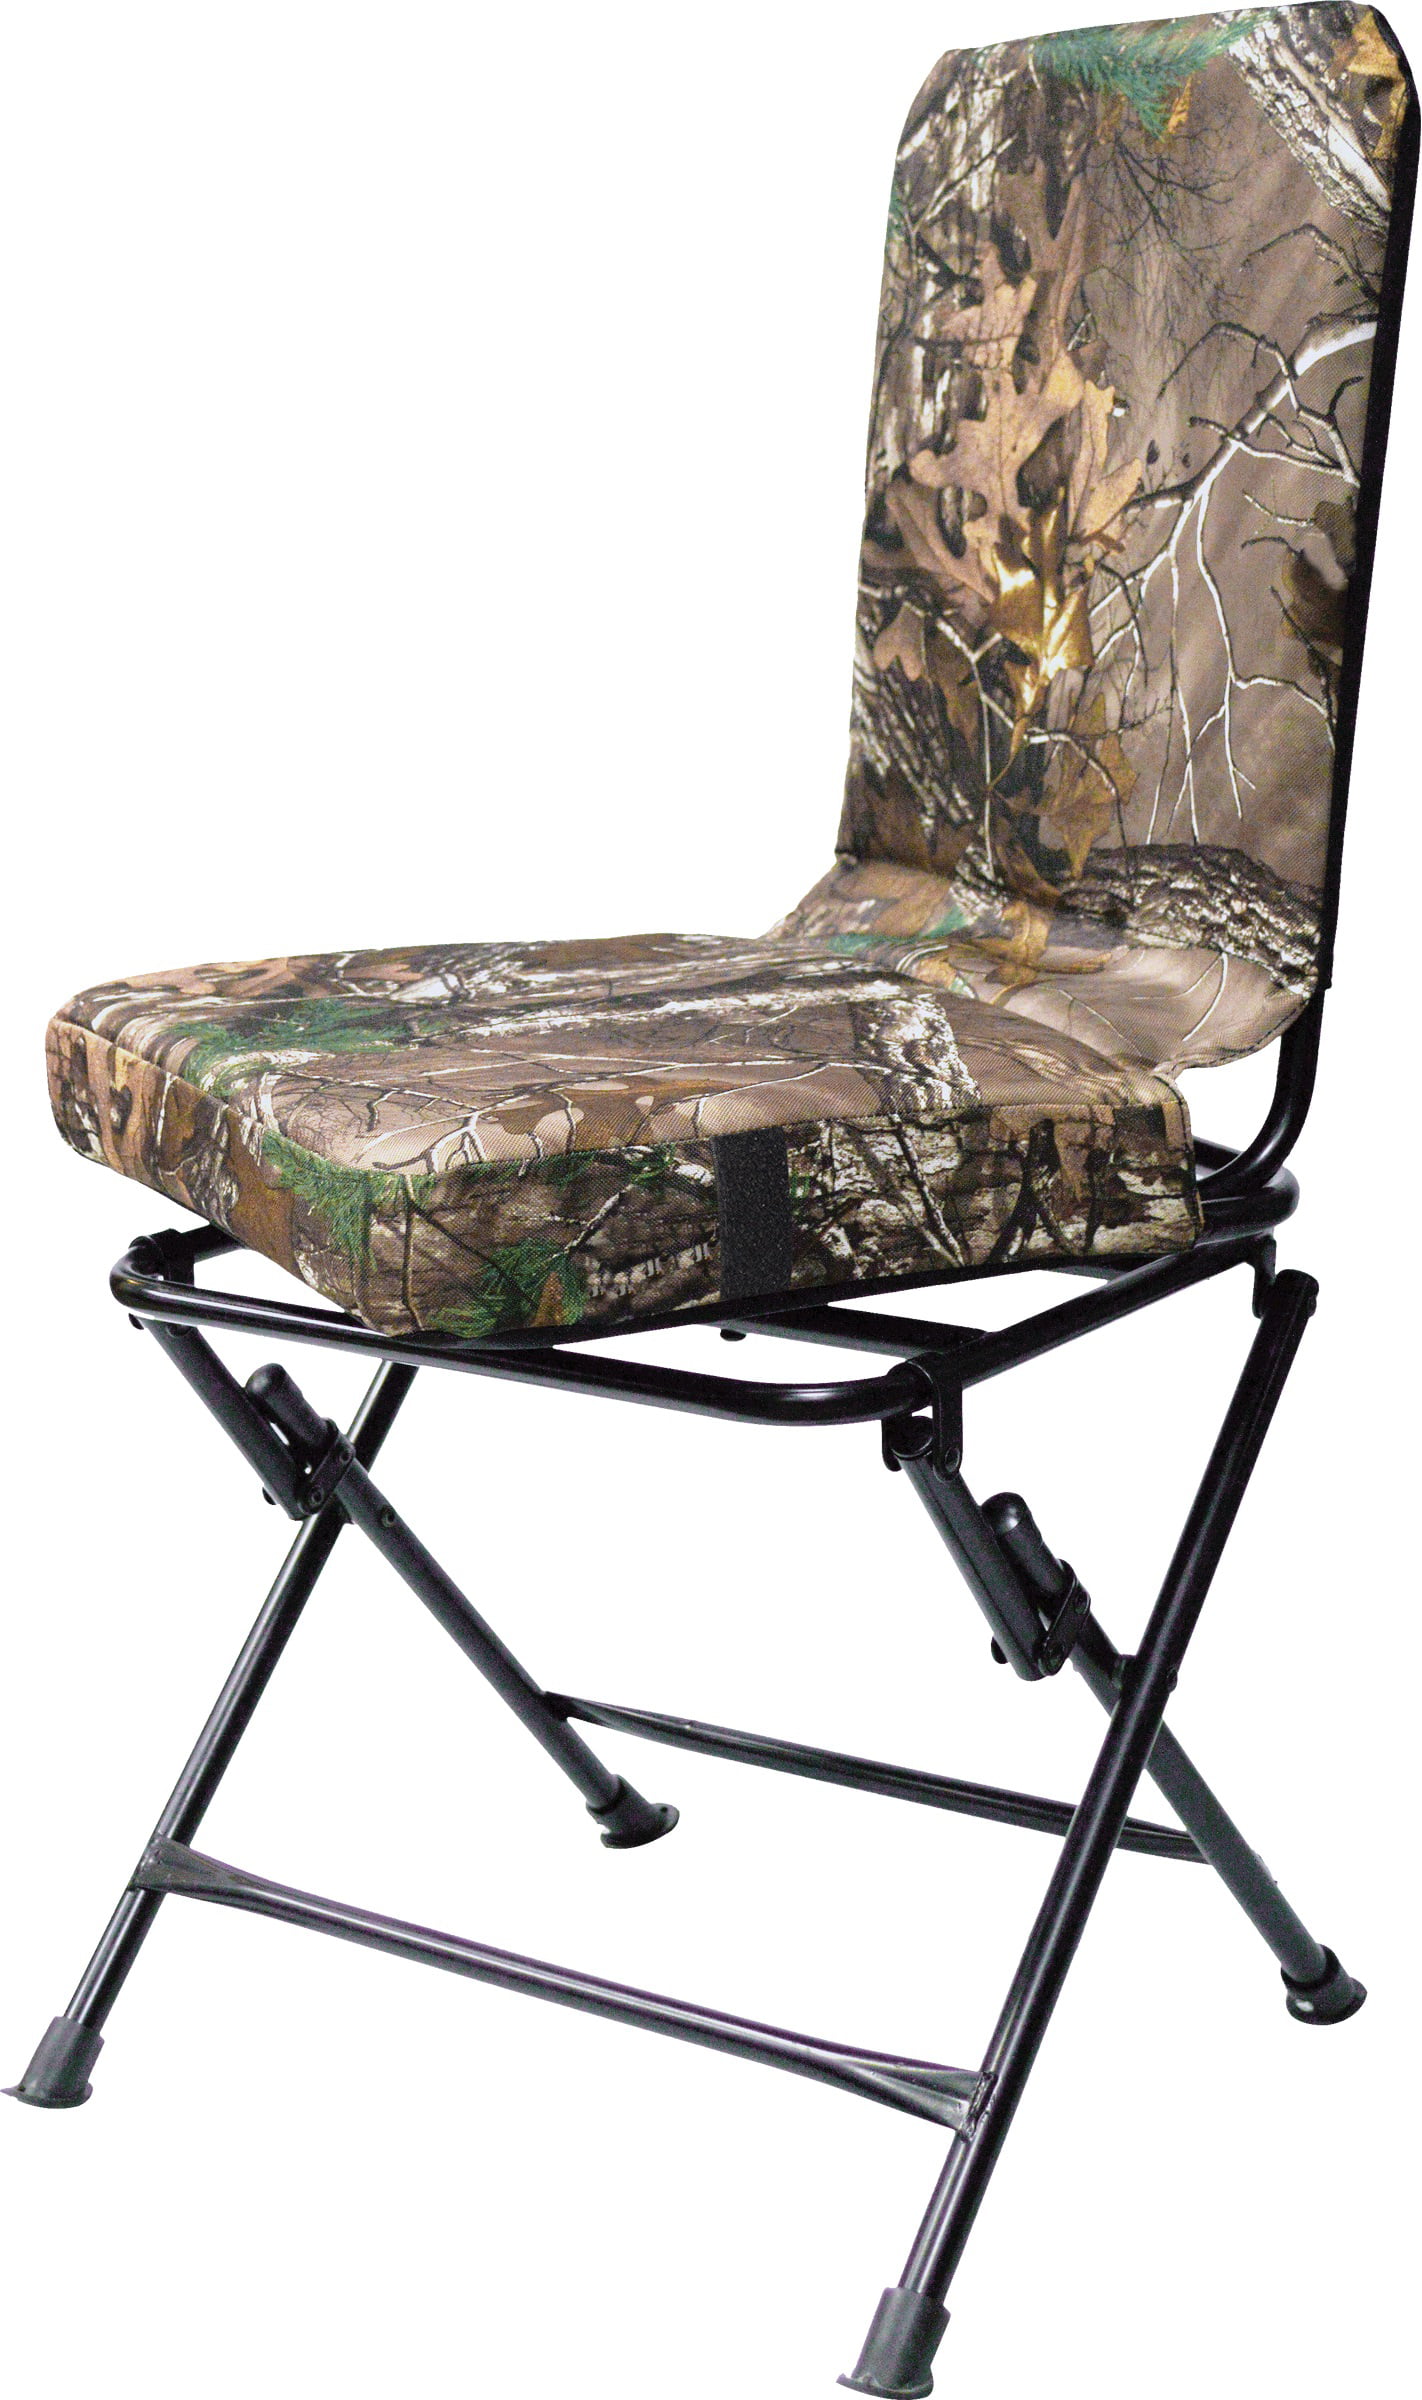 Unique Turkey Hunting Chair Walmart for Living room